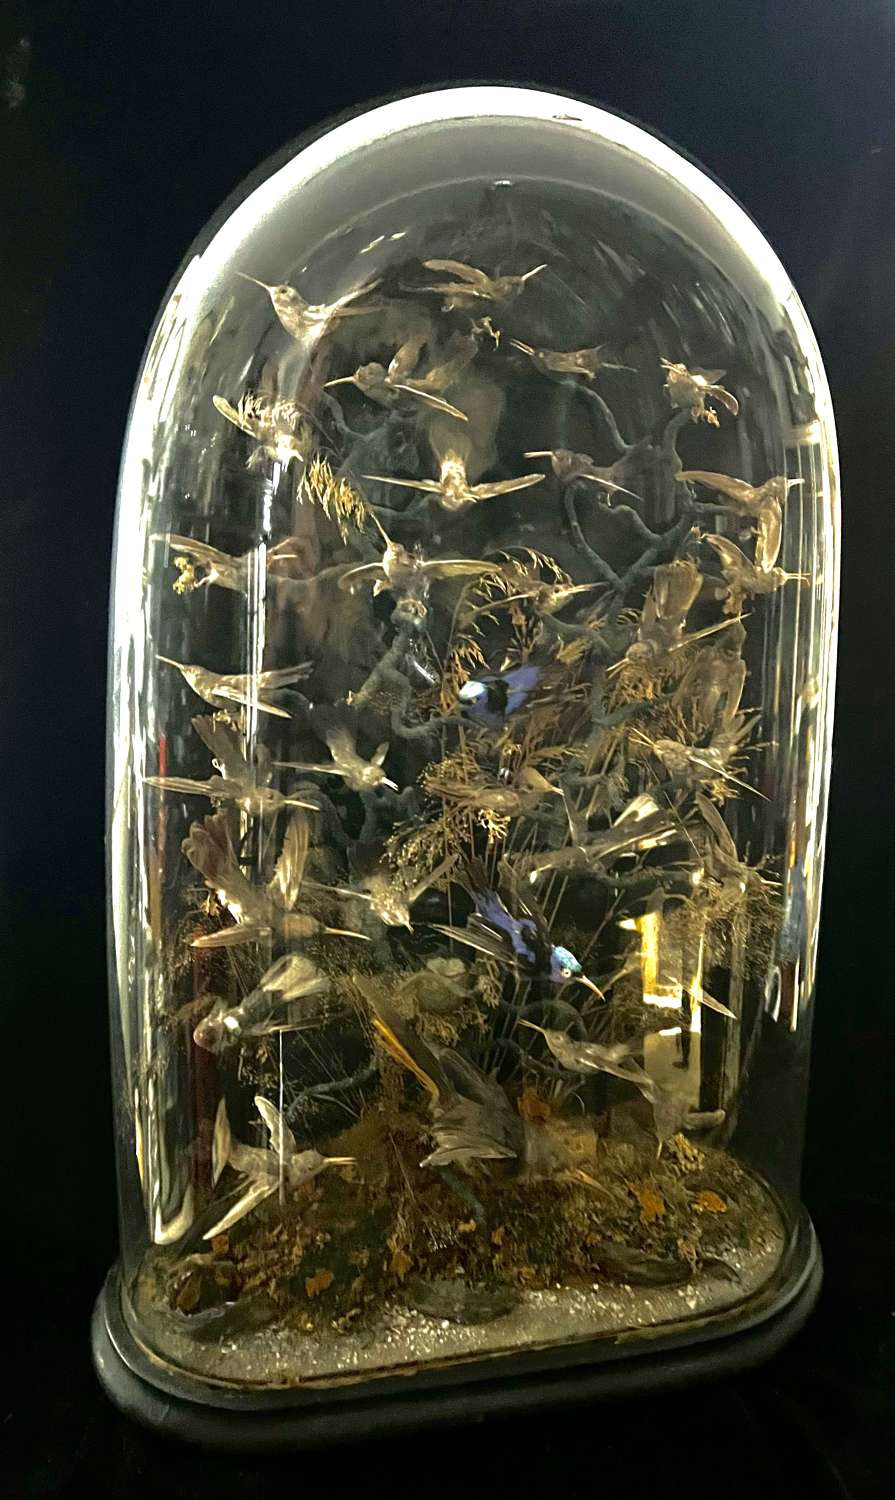 A group of taxidermy Hummingbirds